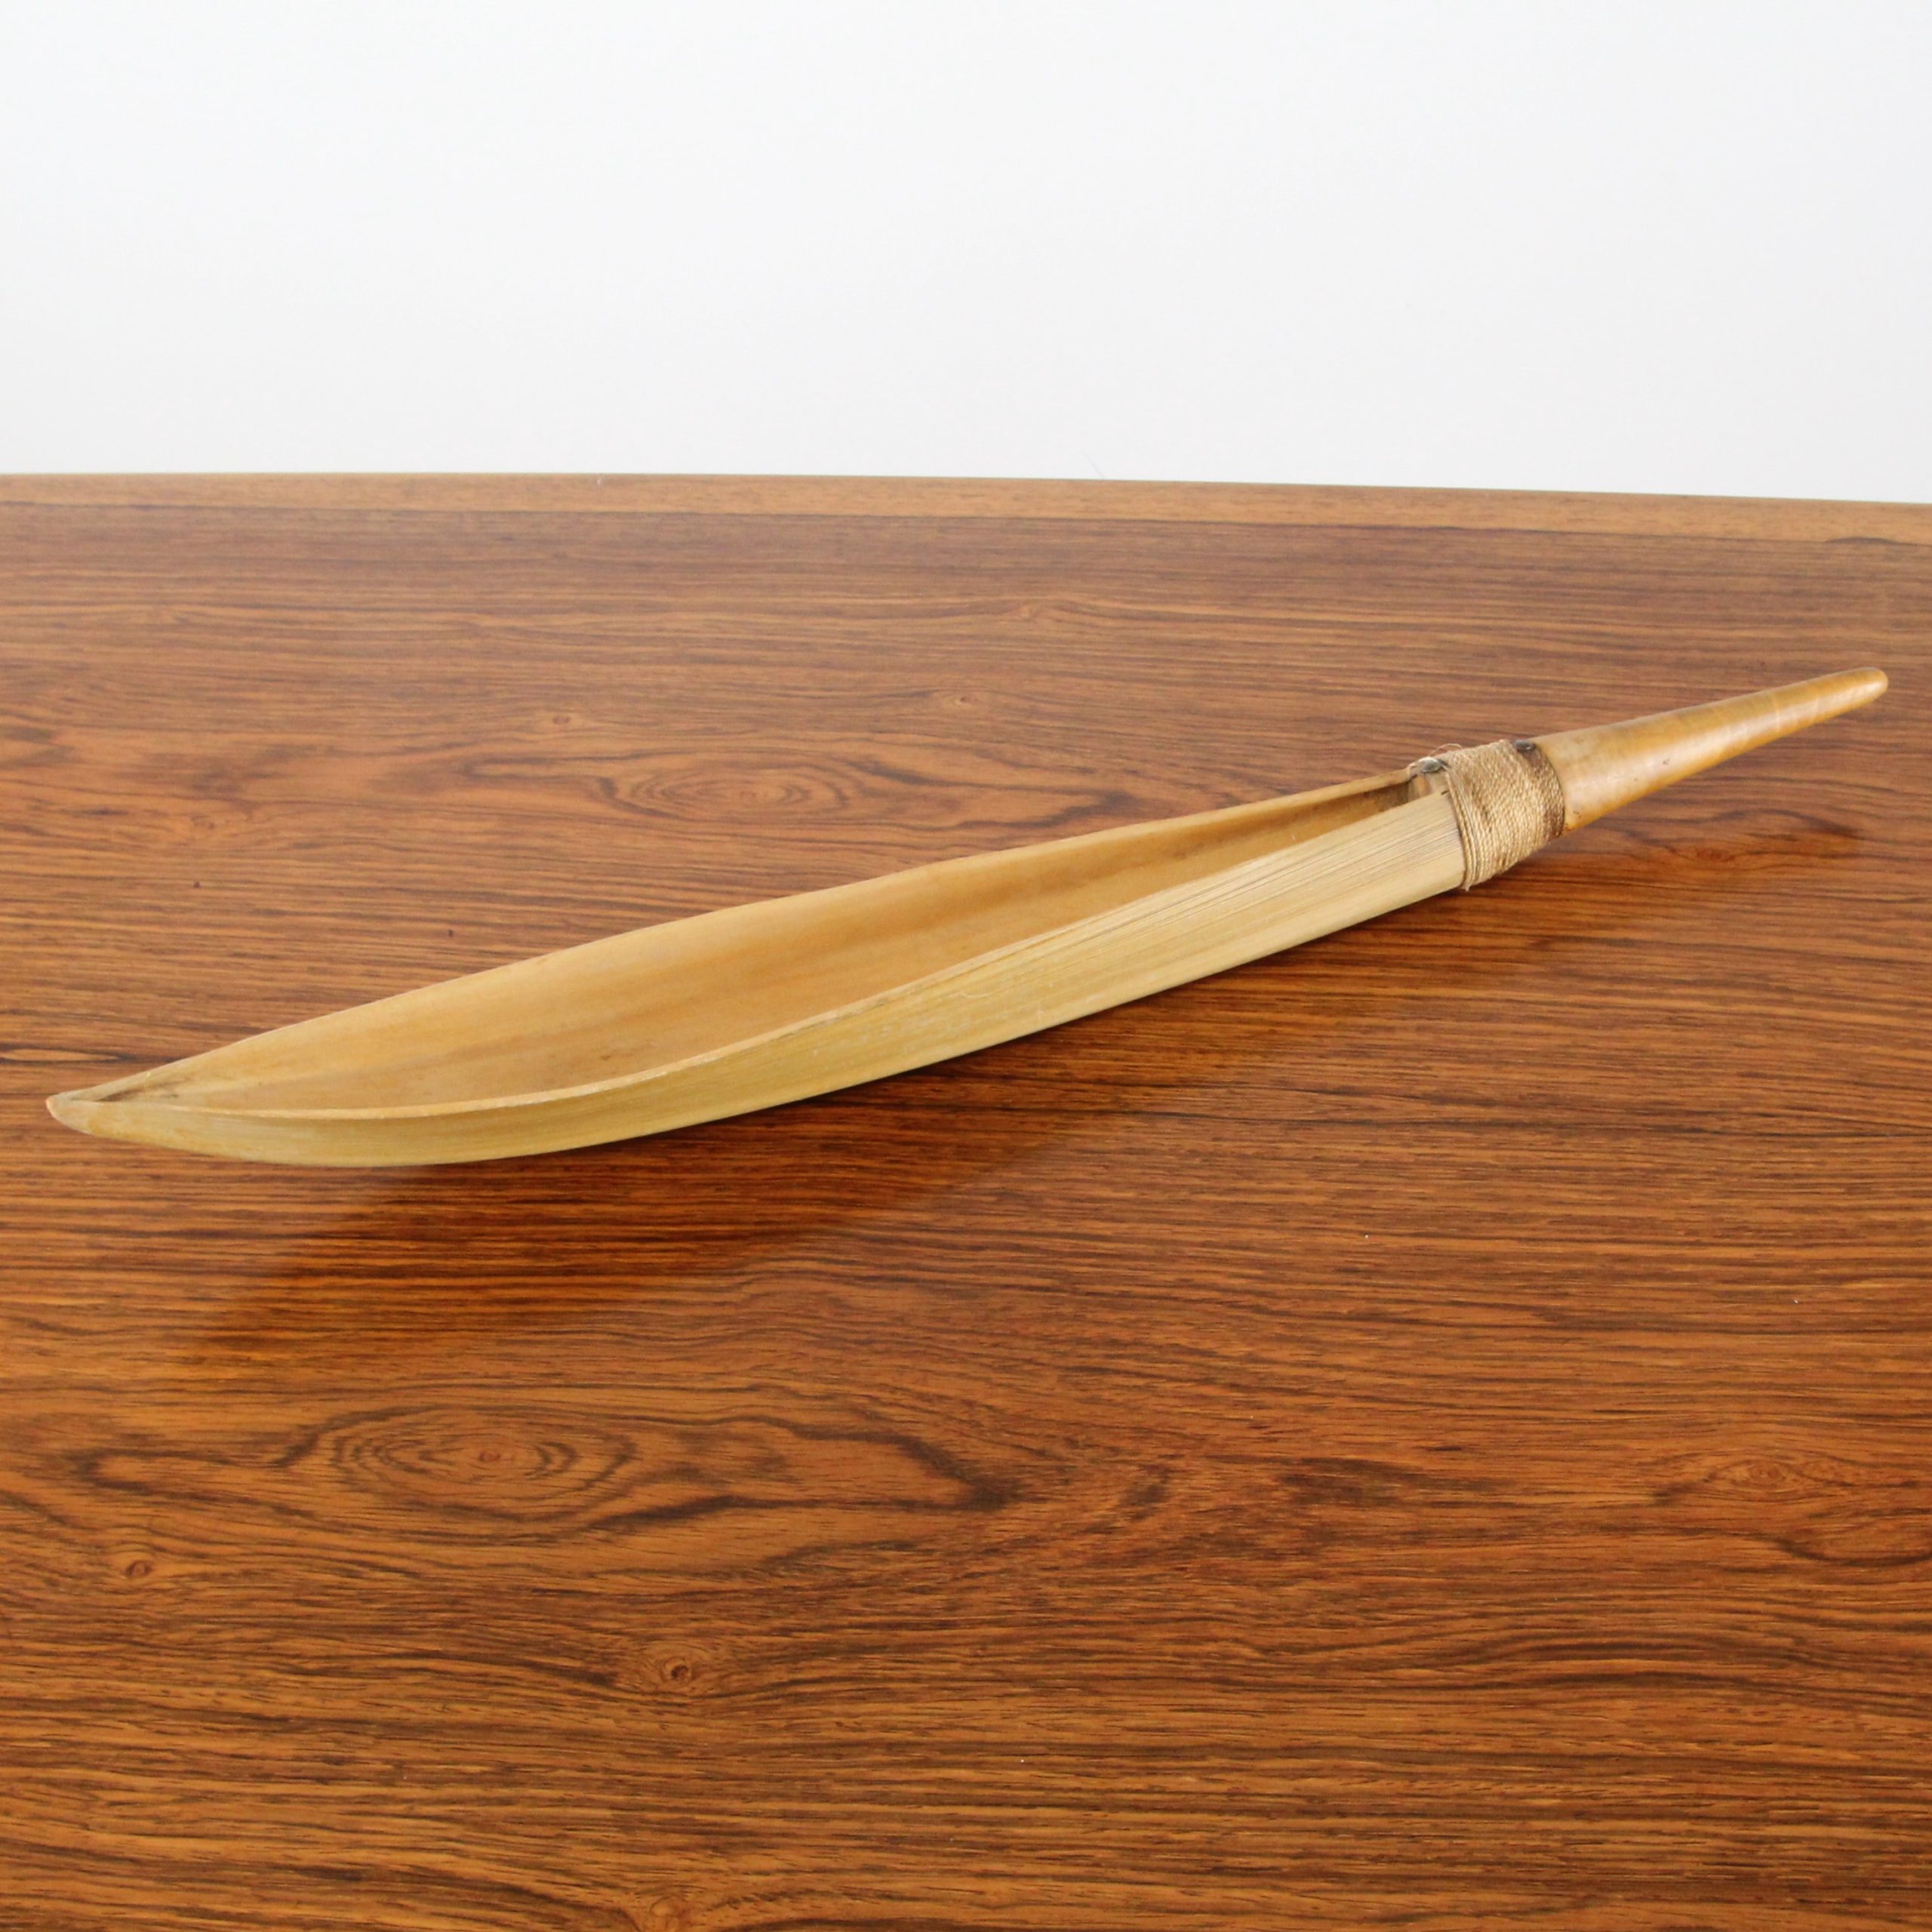 Bamboo serving boat w/ wooden handle by Illums Bolighus